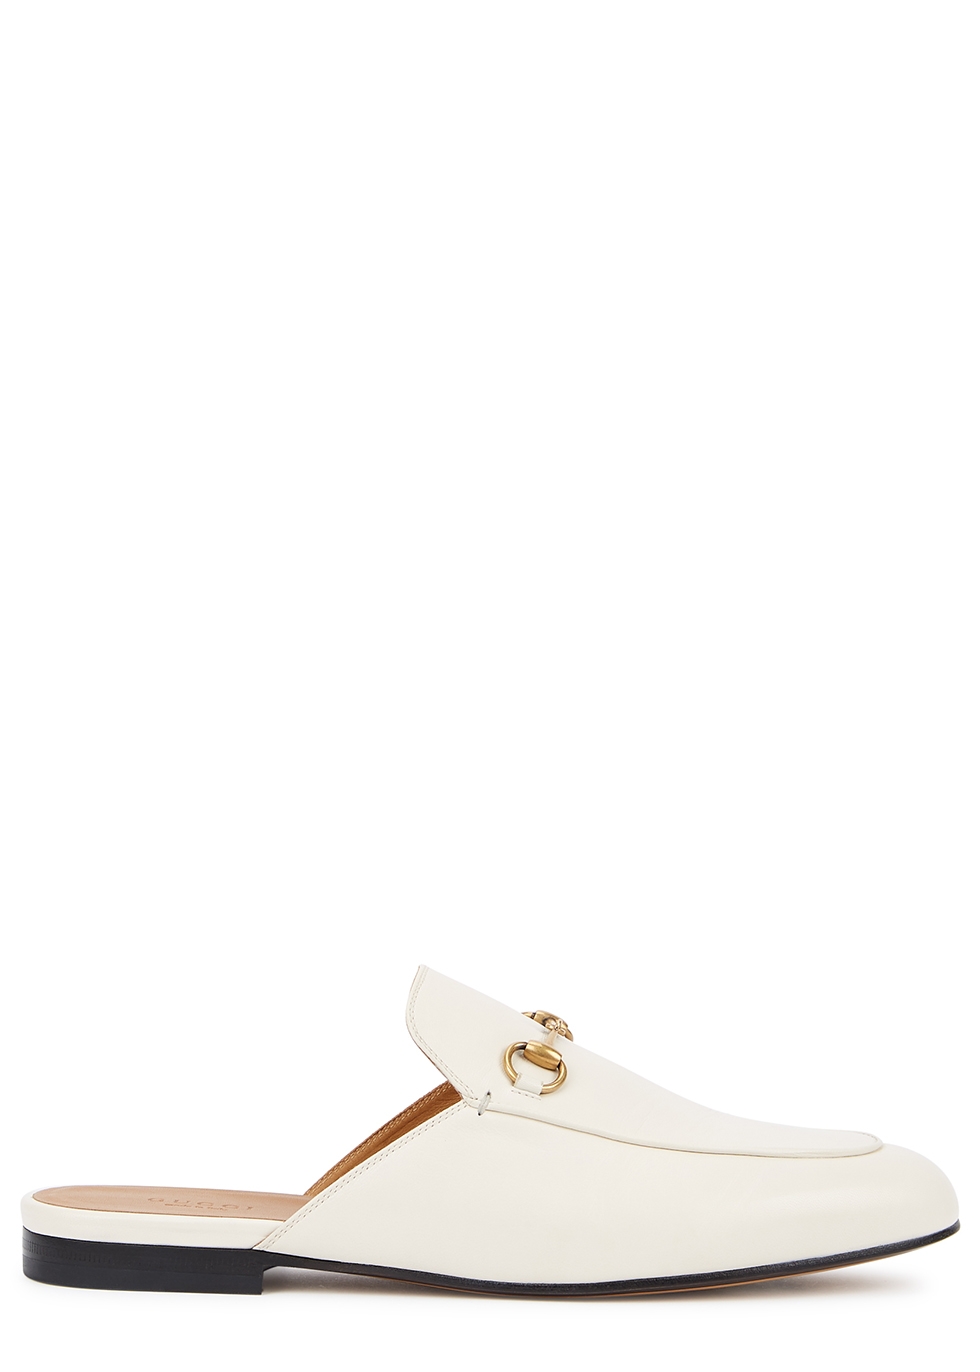 gucci white leather loafers